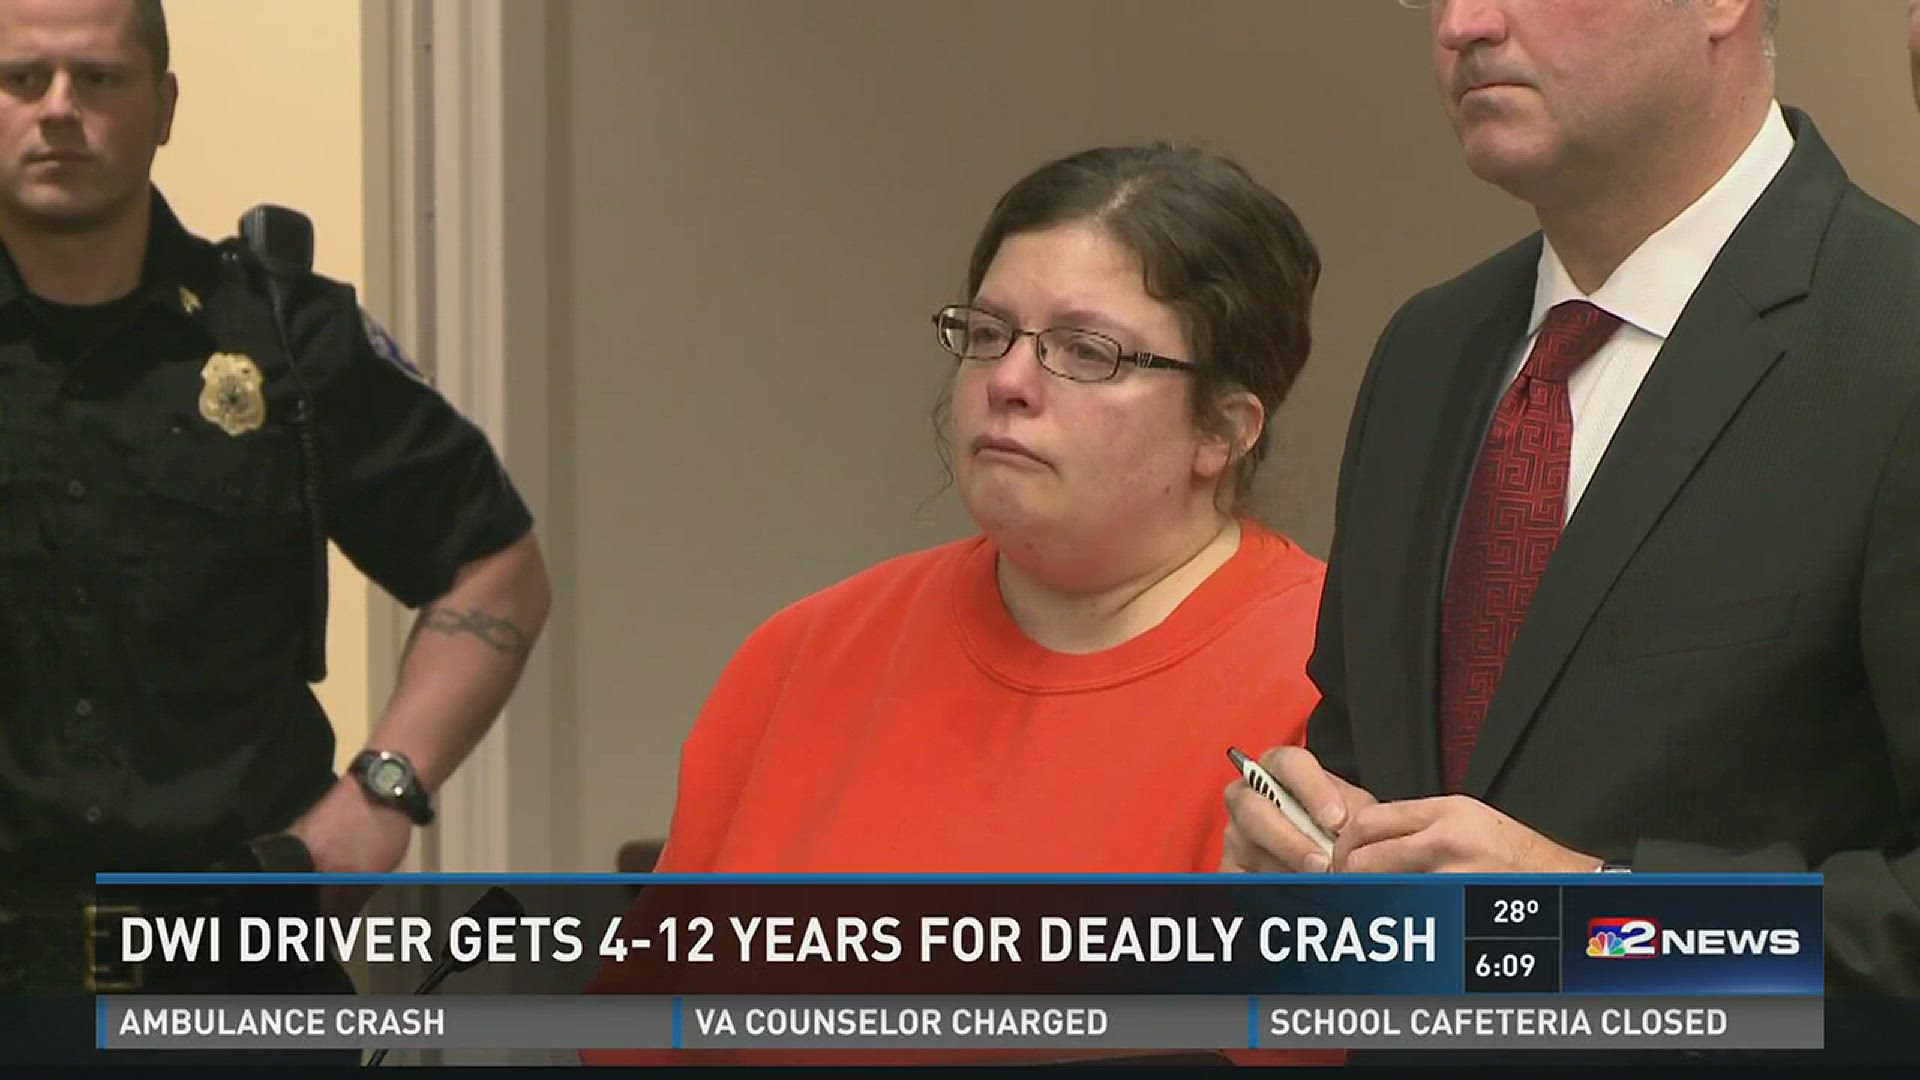 DWI Driver Gets 4-12 Years For Deadly Crash